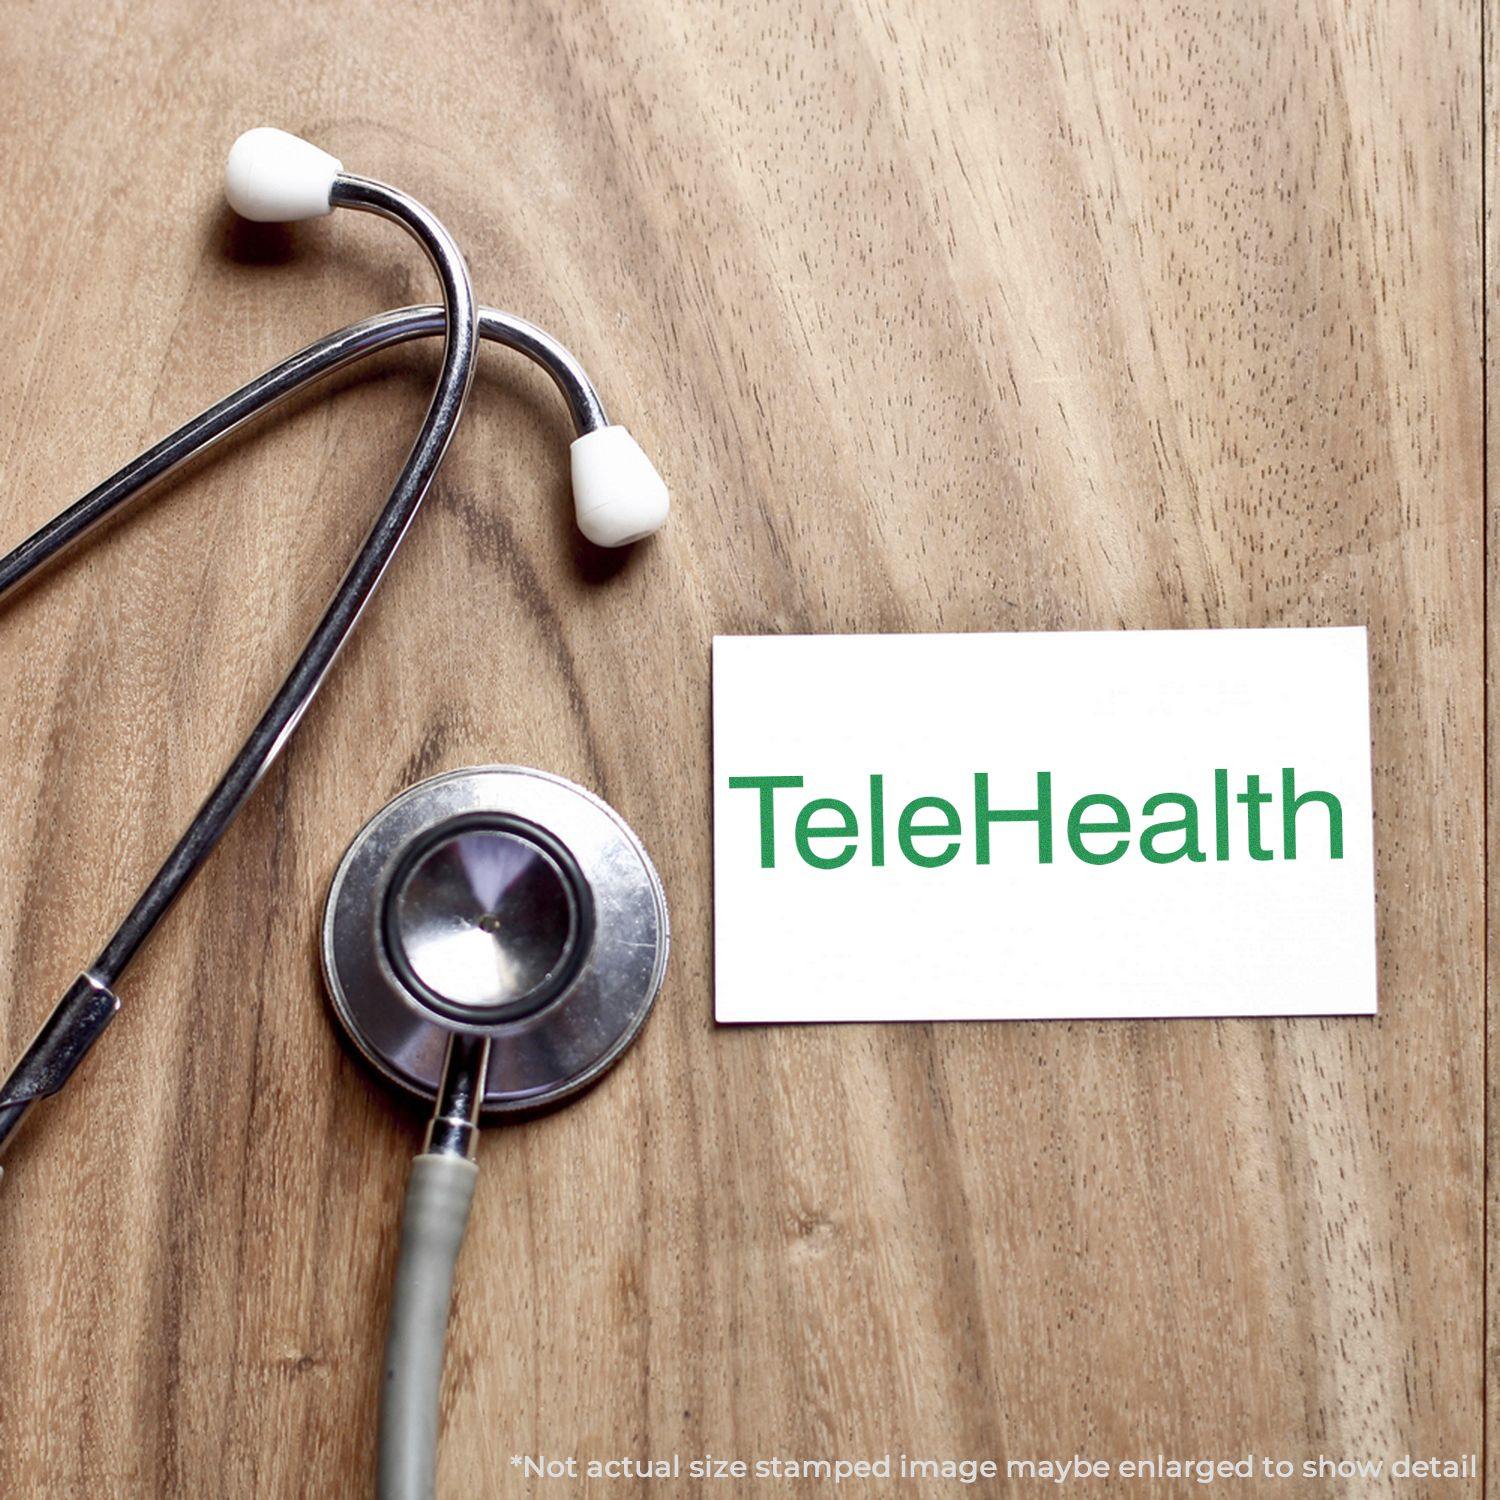 A stock office rubber stamp with a stamped image showing how the text "TeleHealth" in a large font is displayed after stamping.